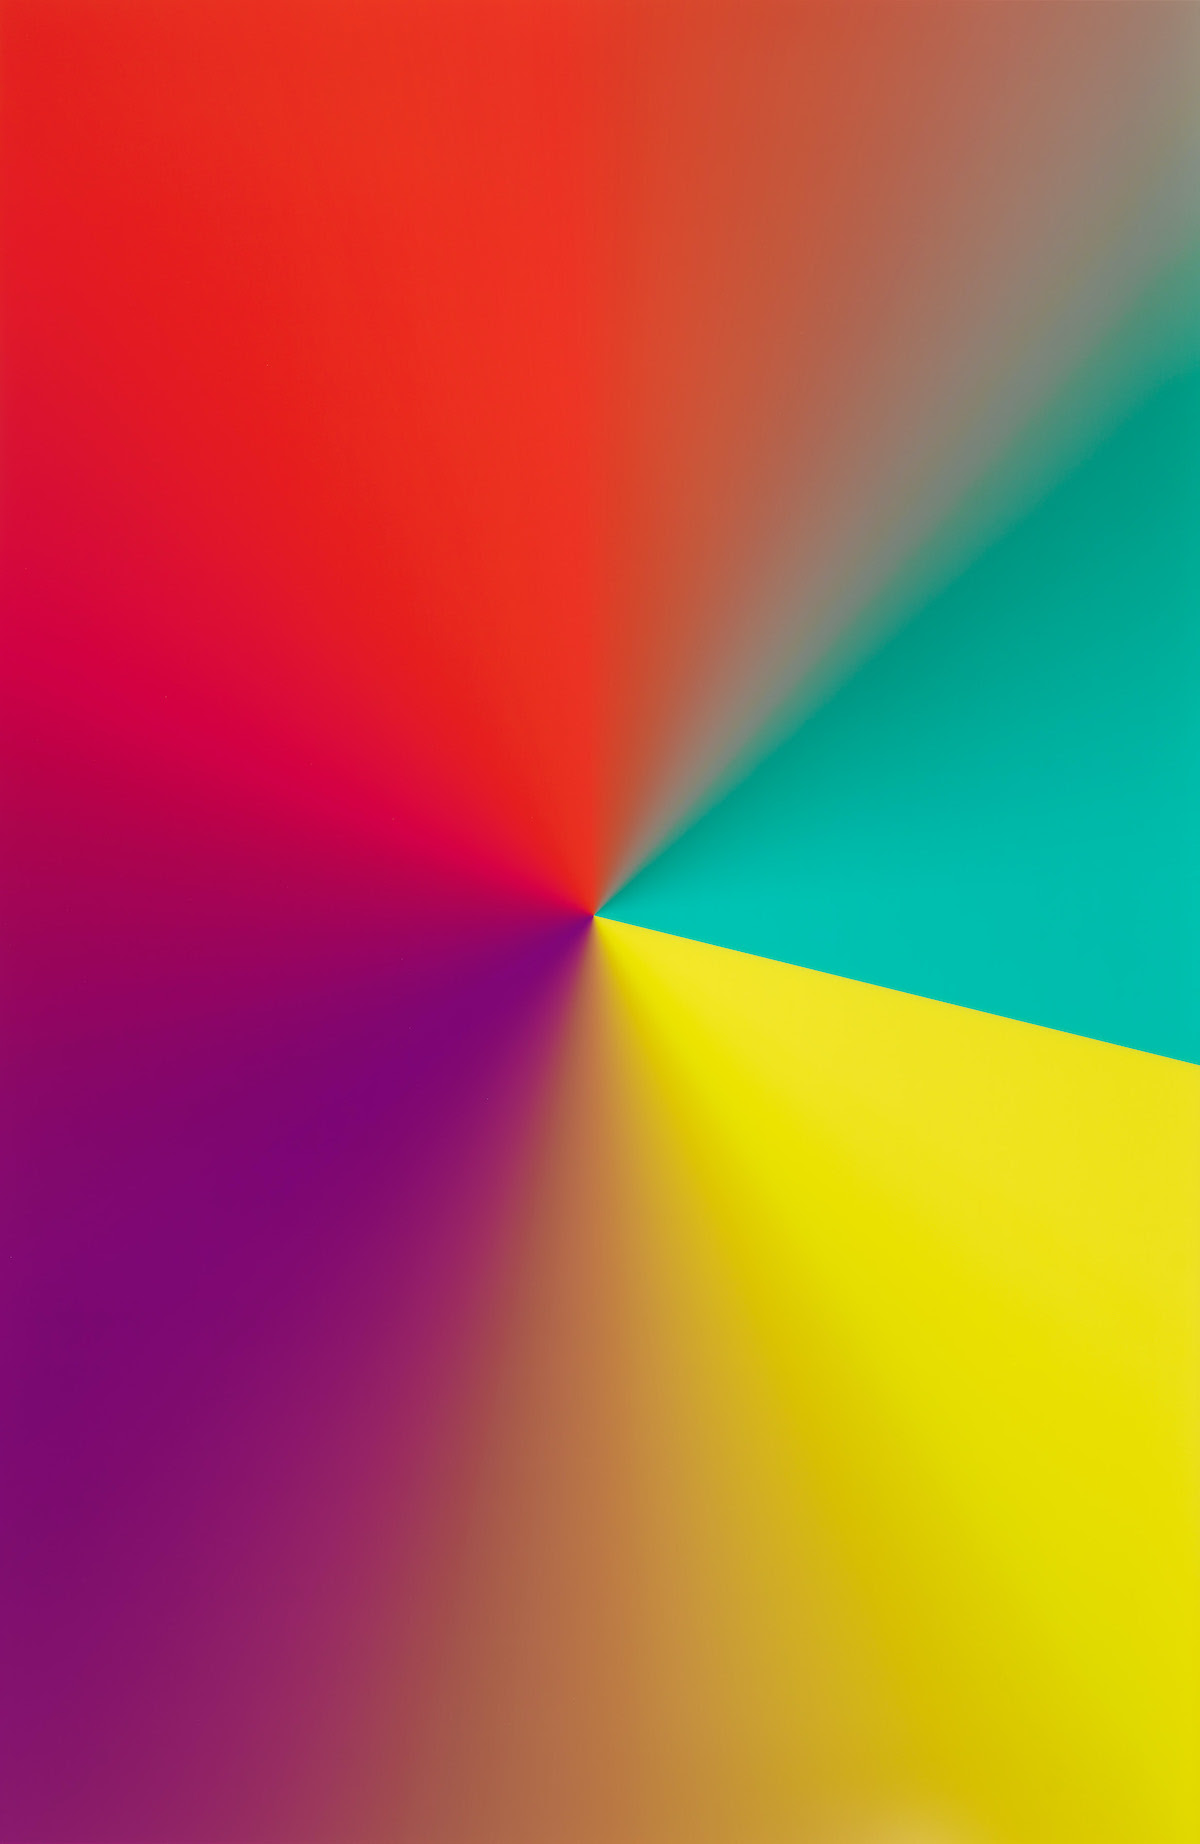 Cory Arcangel (b. 1978), Photoshop CS: 110 by 72 inches, 300 DPI, RGB, square pixels, default gradient "Yellow, Violet, Red, Teal", mousedown y=16450 x=10750, mouse up y=18850 x=20600, 2009. 